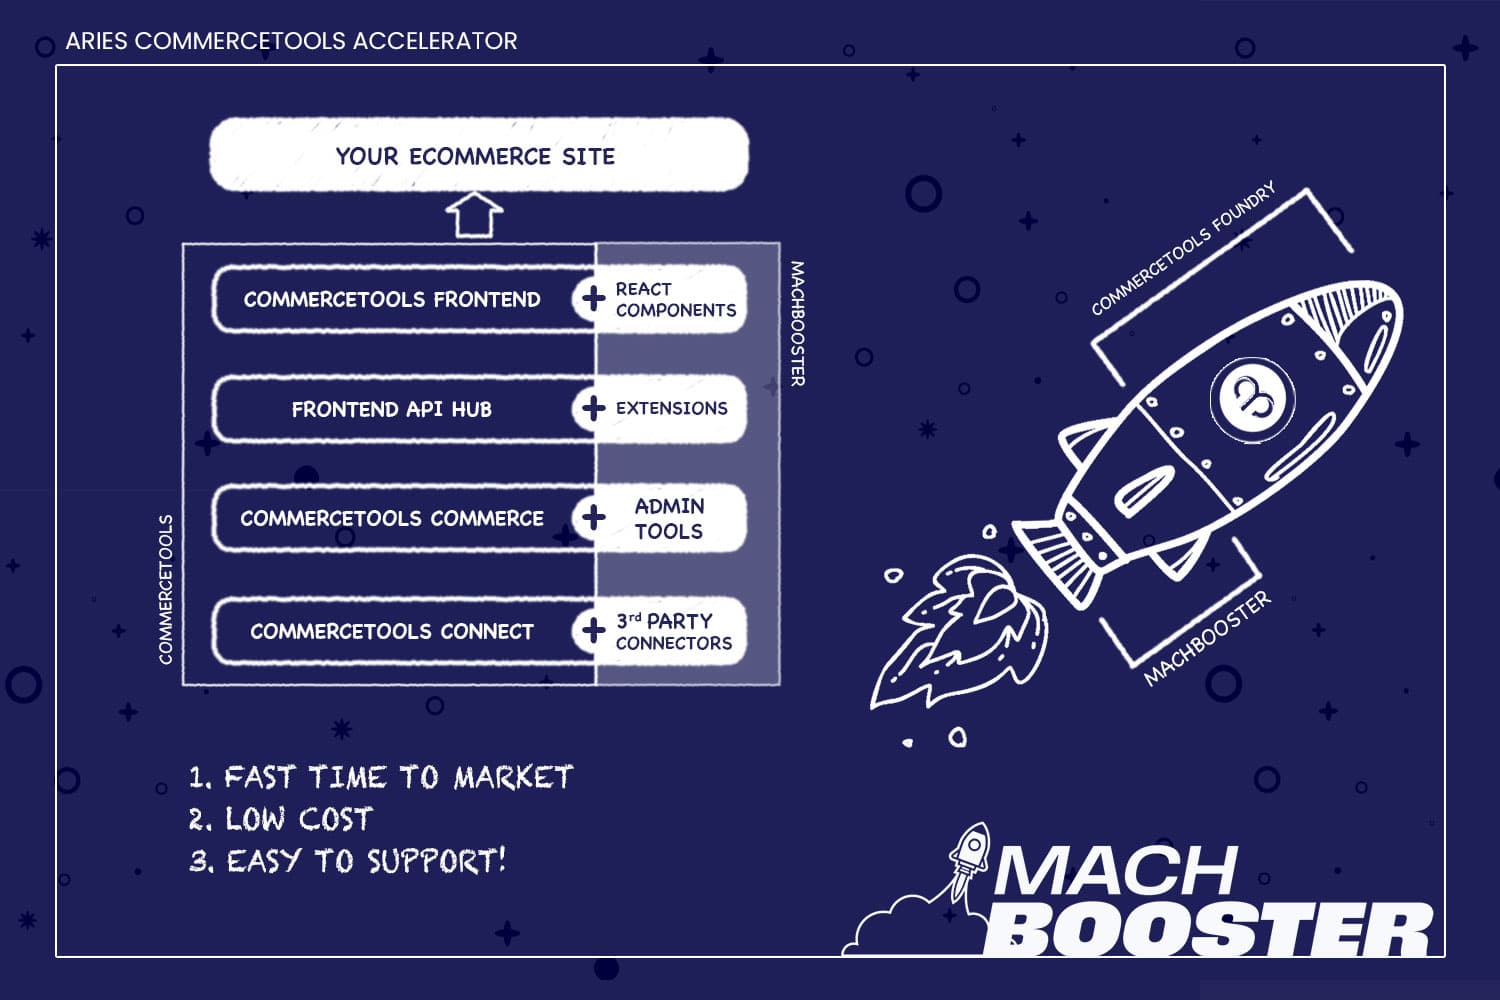 a blueprint of the MACHBooster commercetools accelerator with a rocketship and diagram.